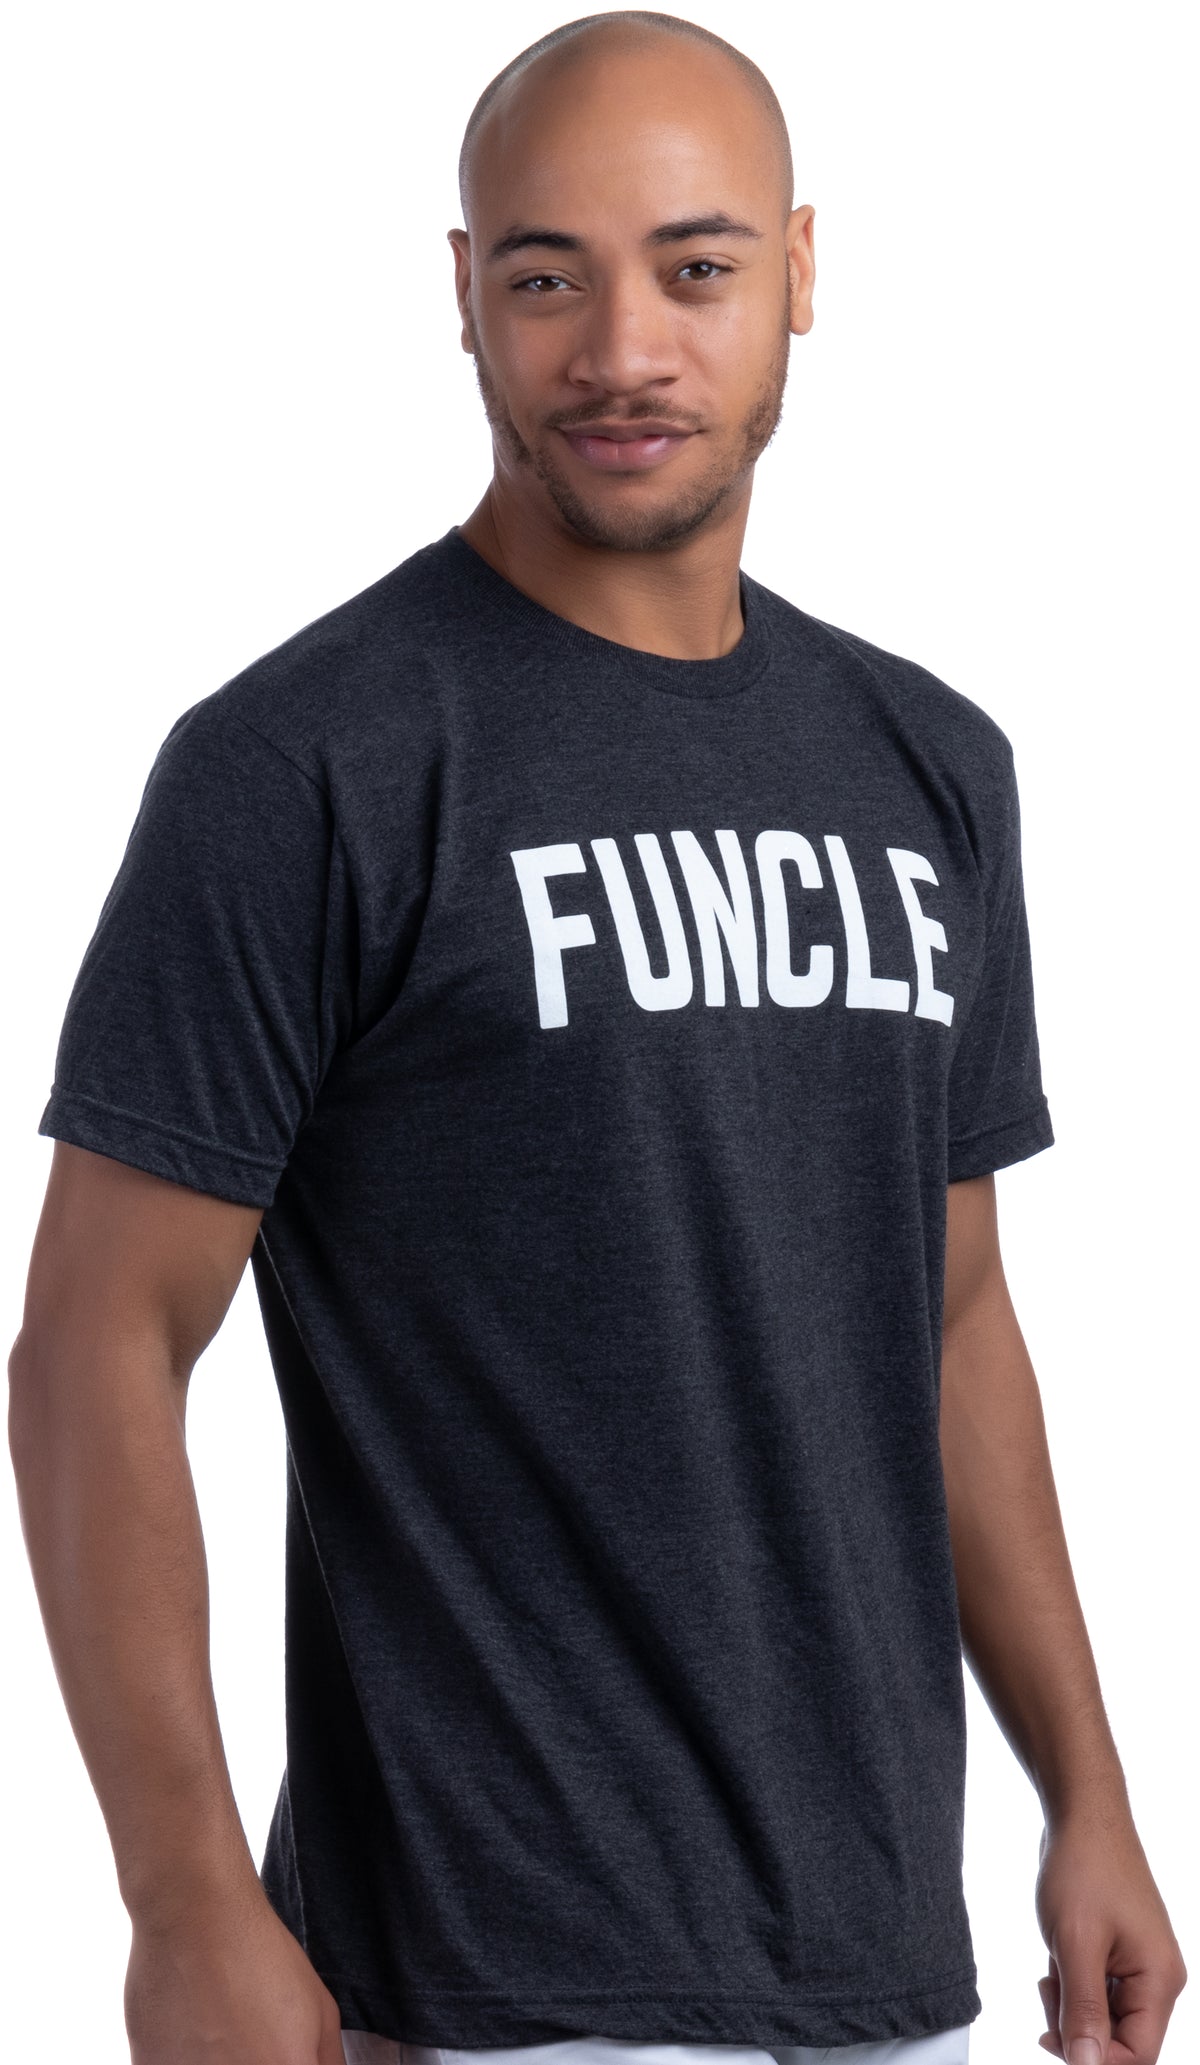 FUNCLE - Funny Uncle New Baby Pregnancy Maternity Niece Nephew Men T-shirt